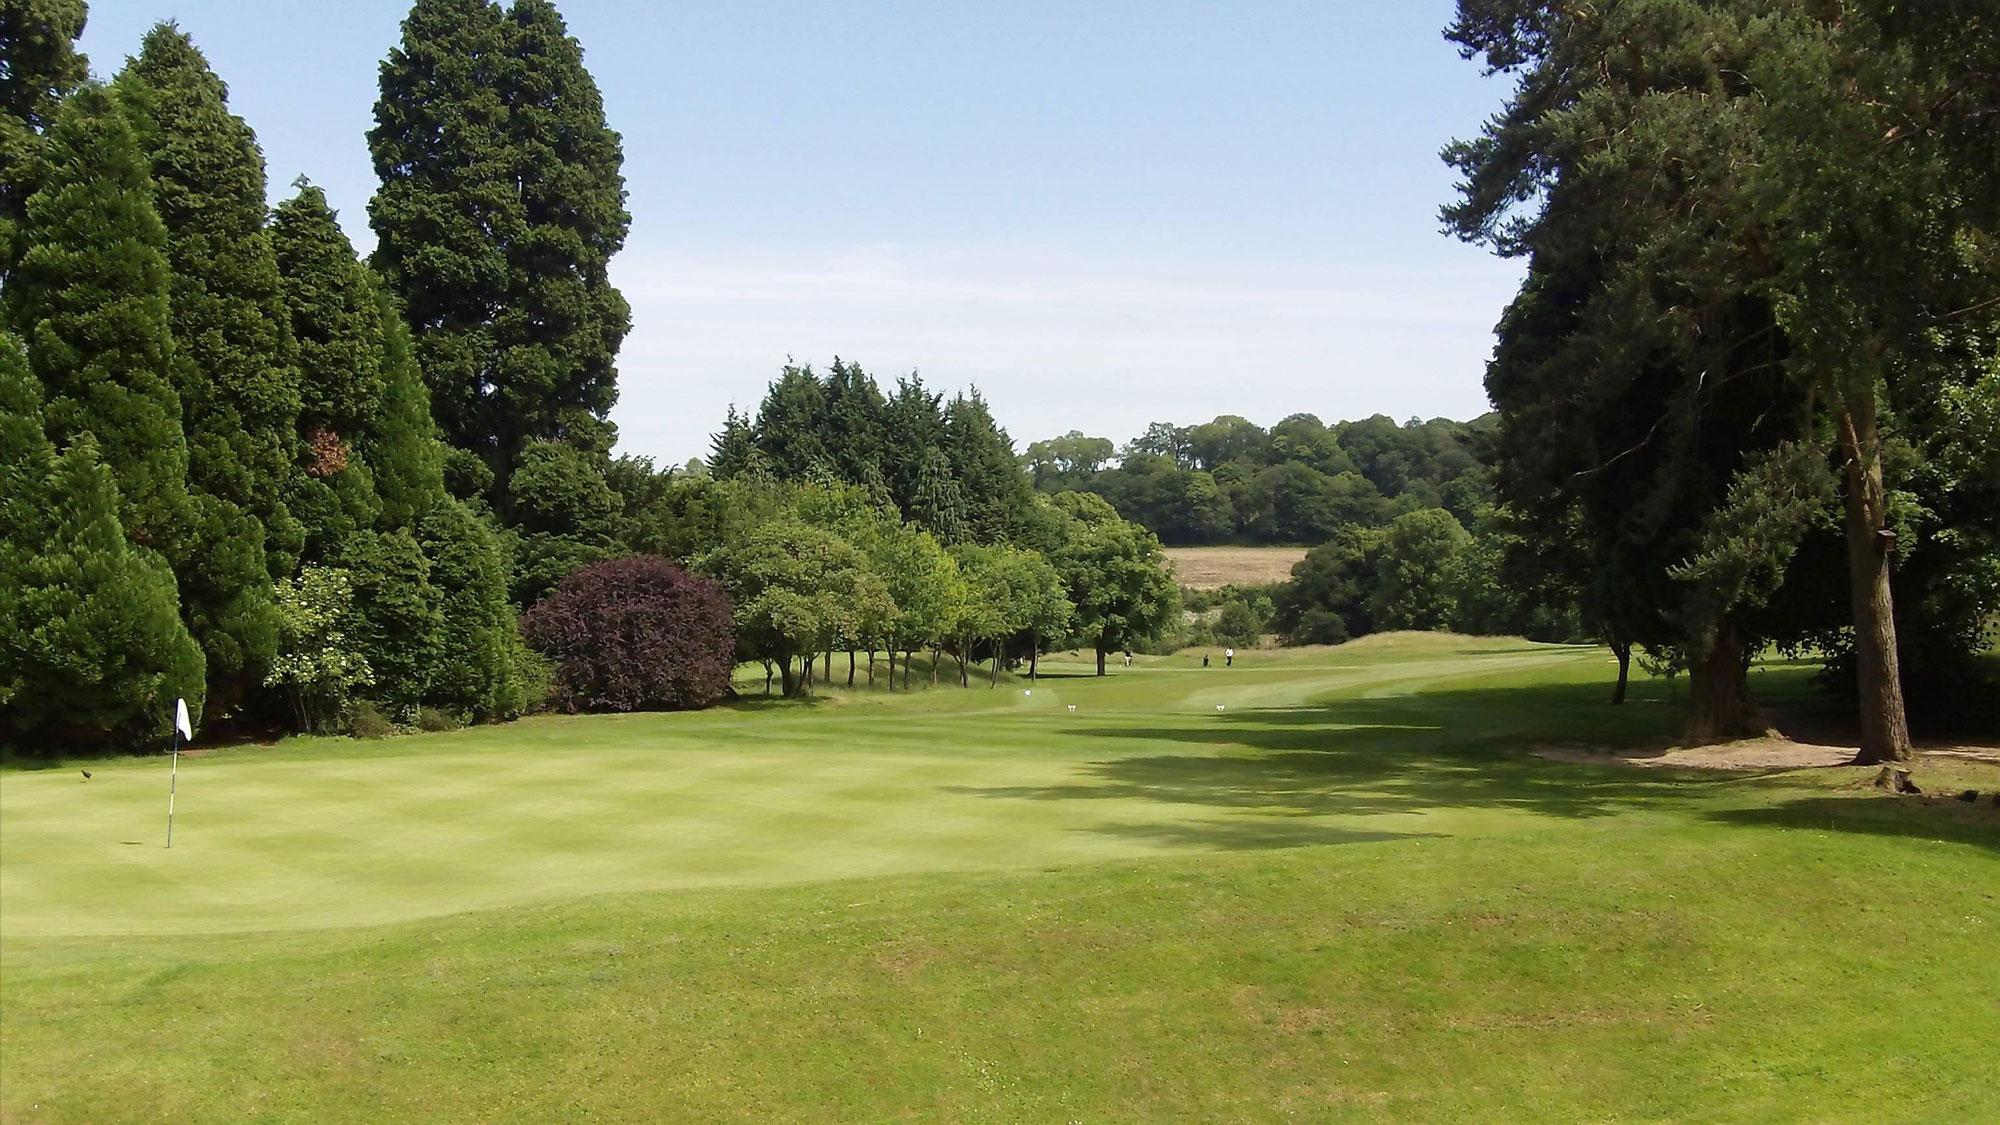 Donnington Valley Golf Club provides among the finest golf course in Berkshire